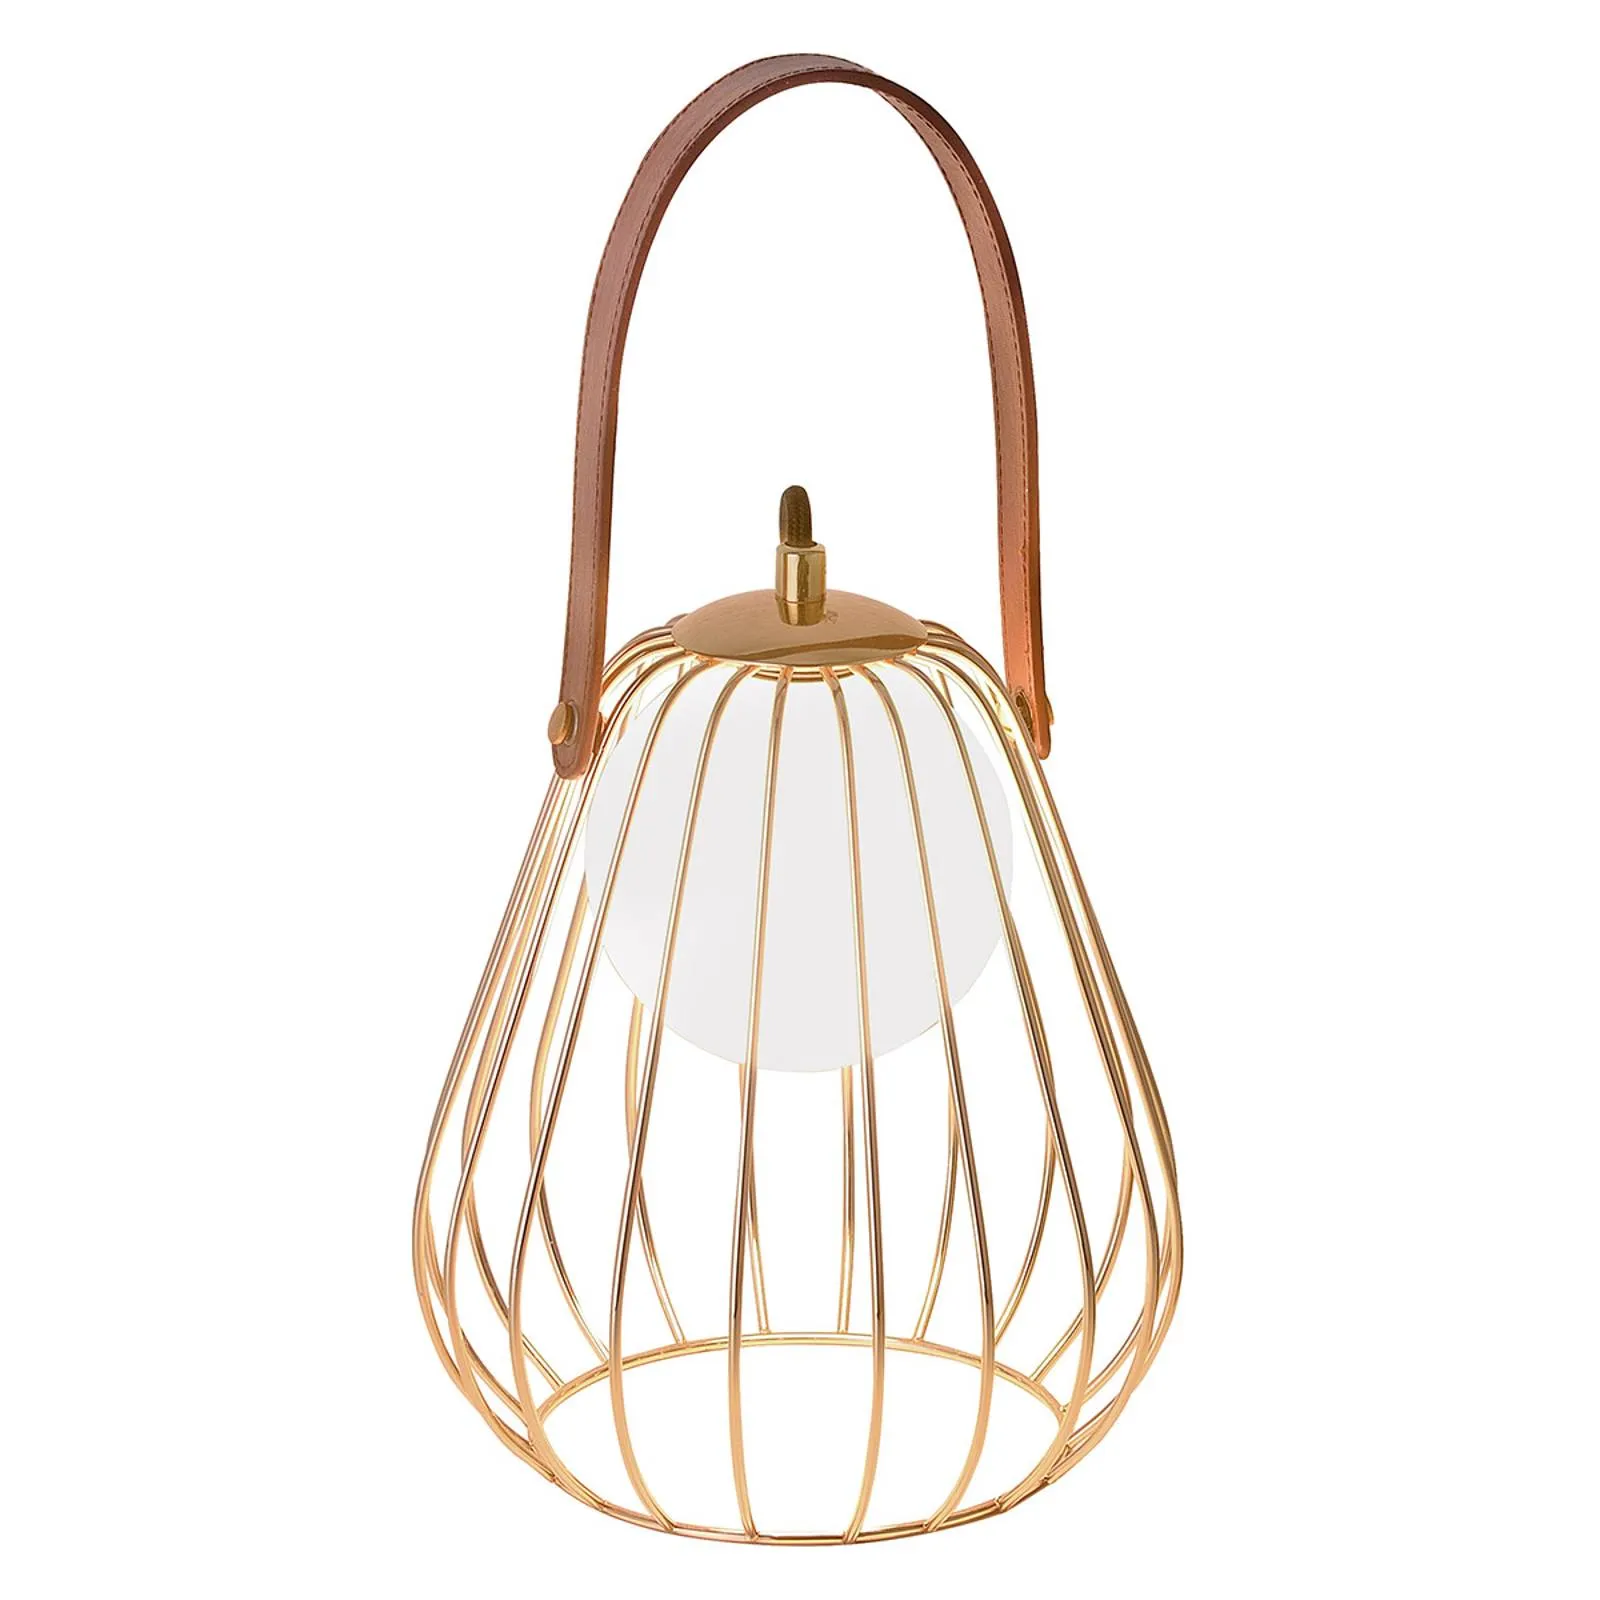 Levik table lamp with a golden cage